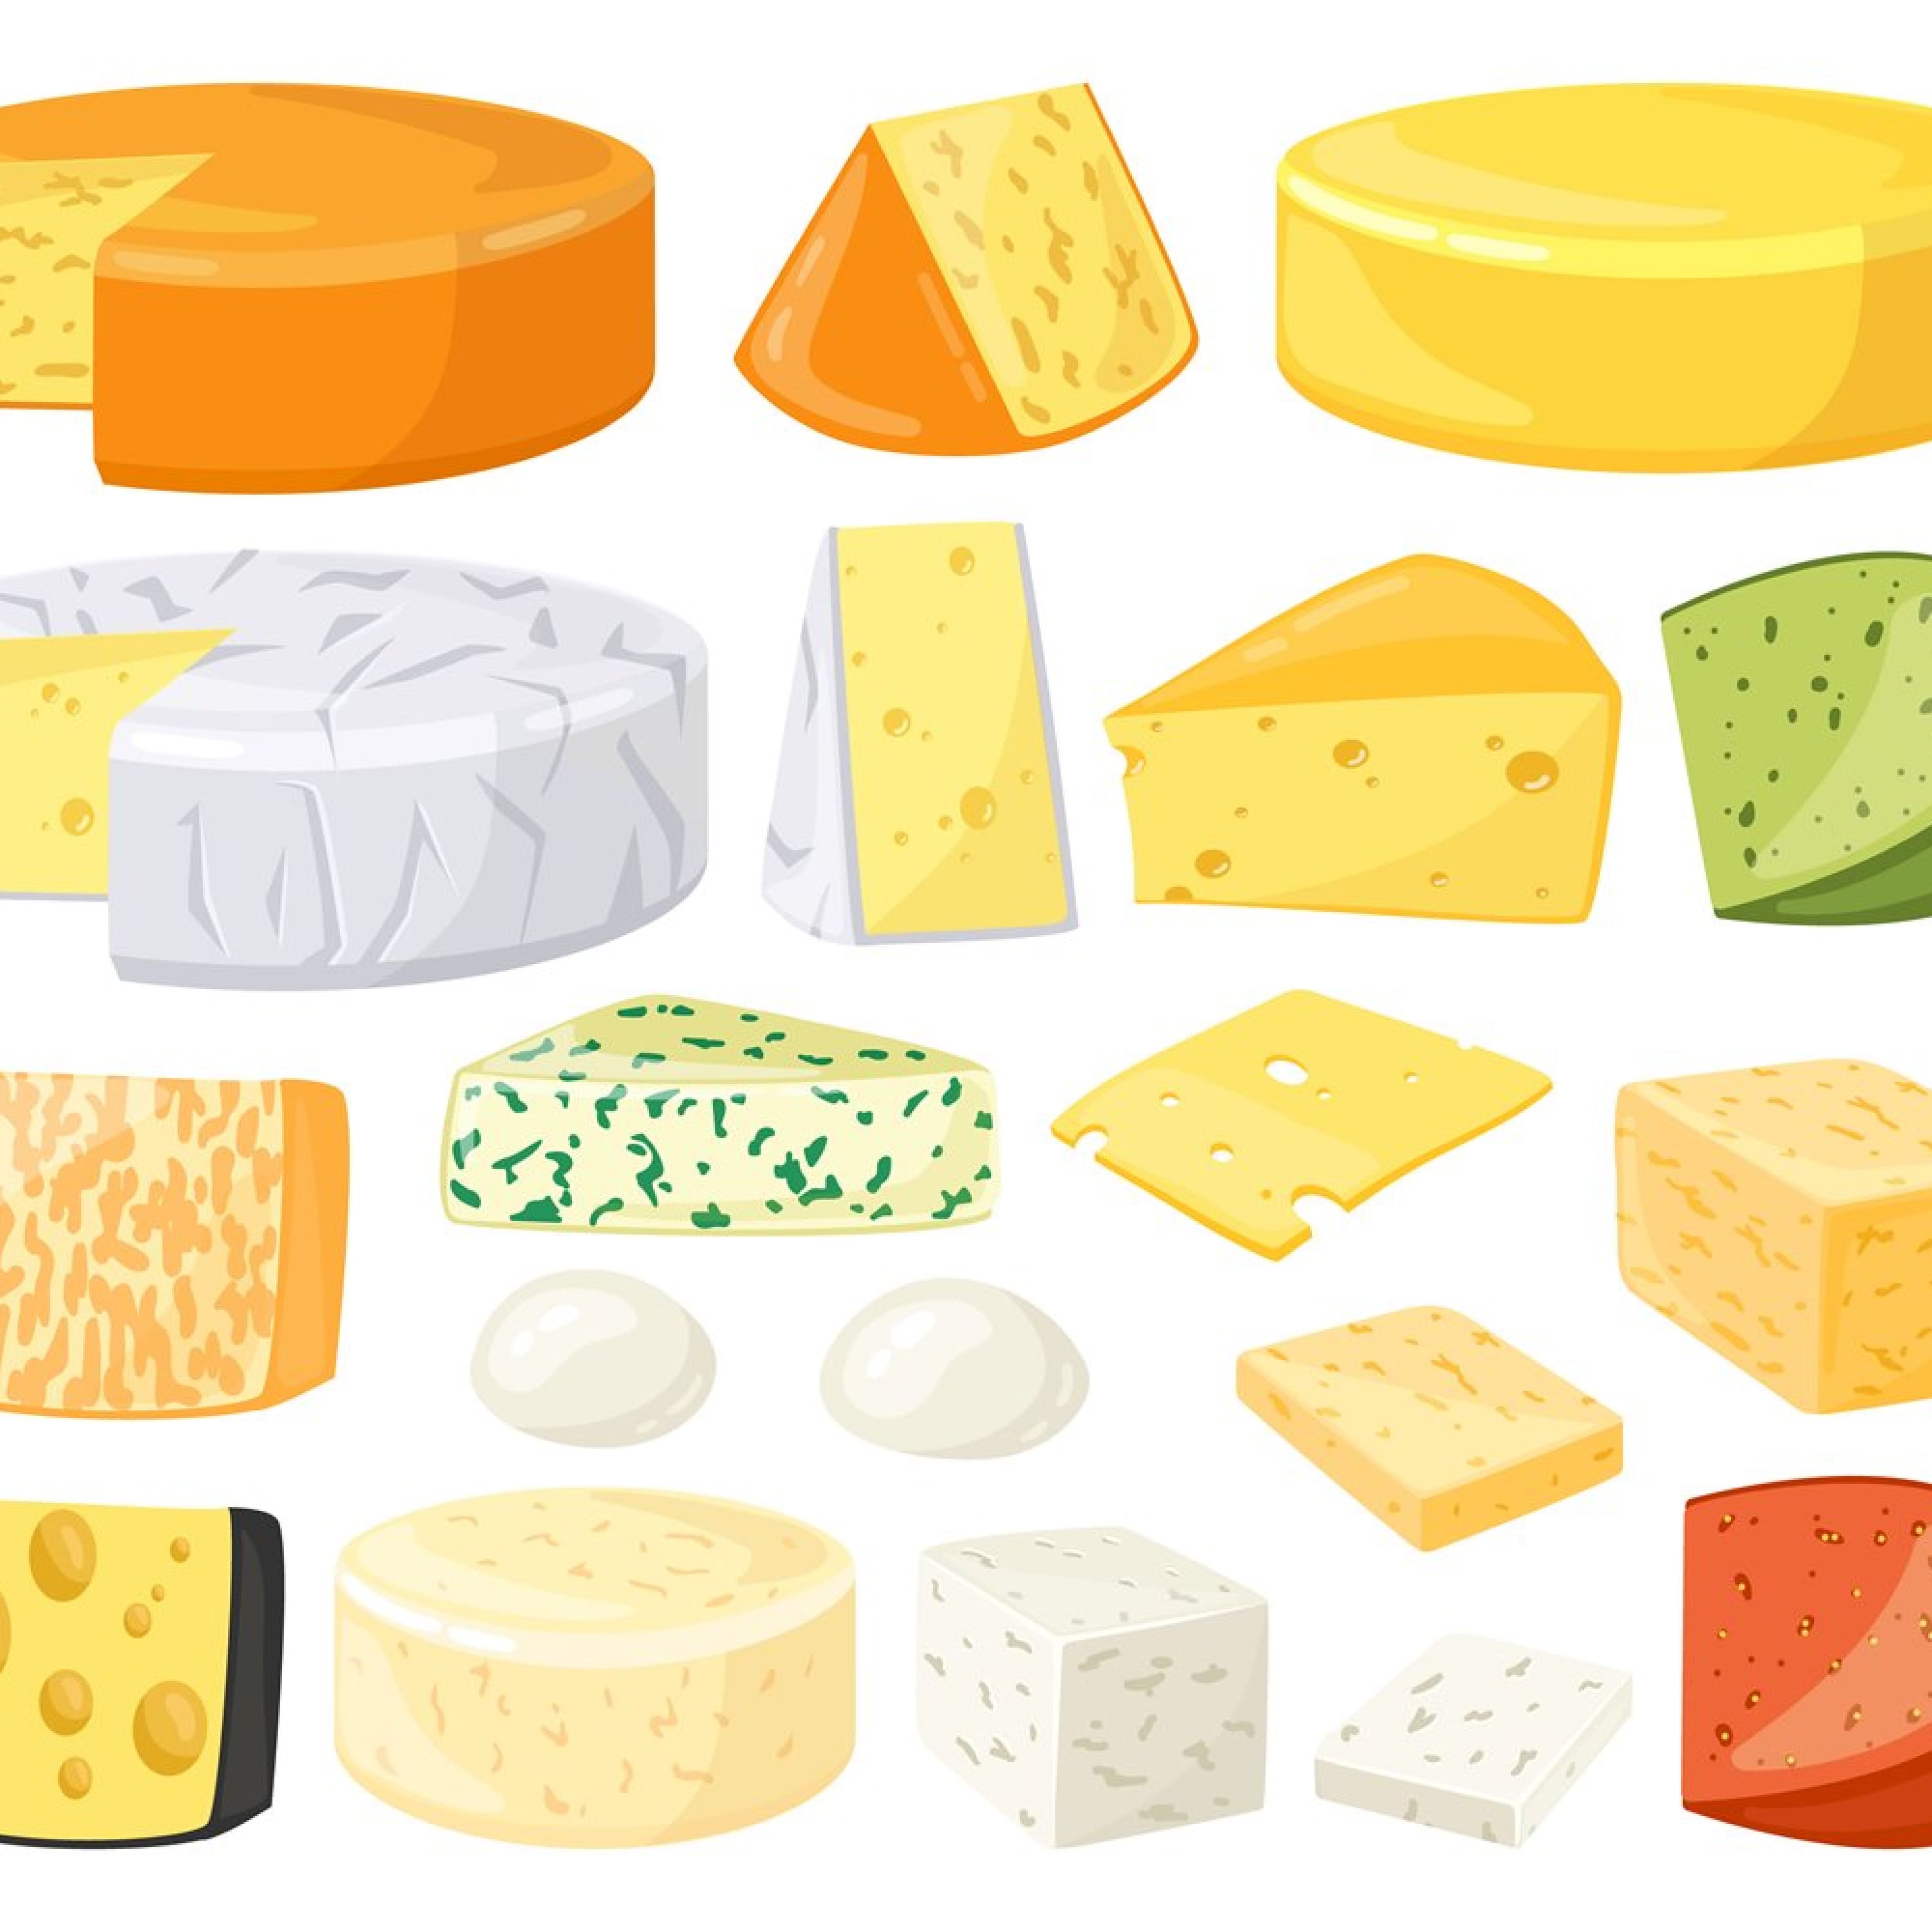 Collection of cartoon images of different types of cheese.